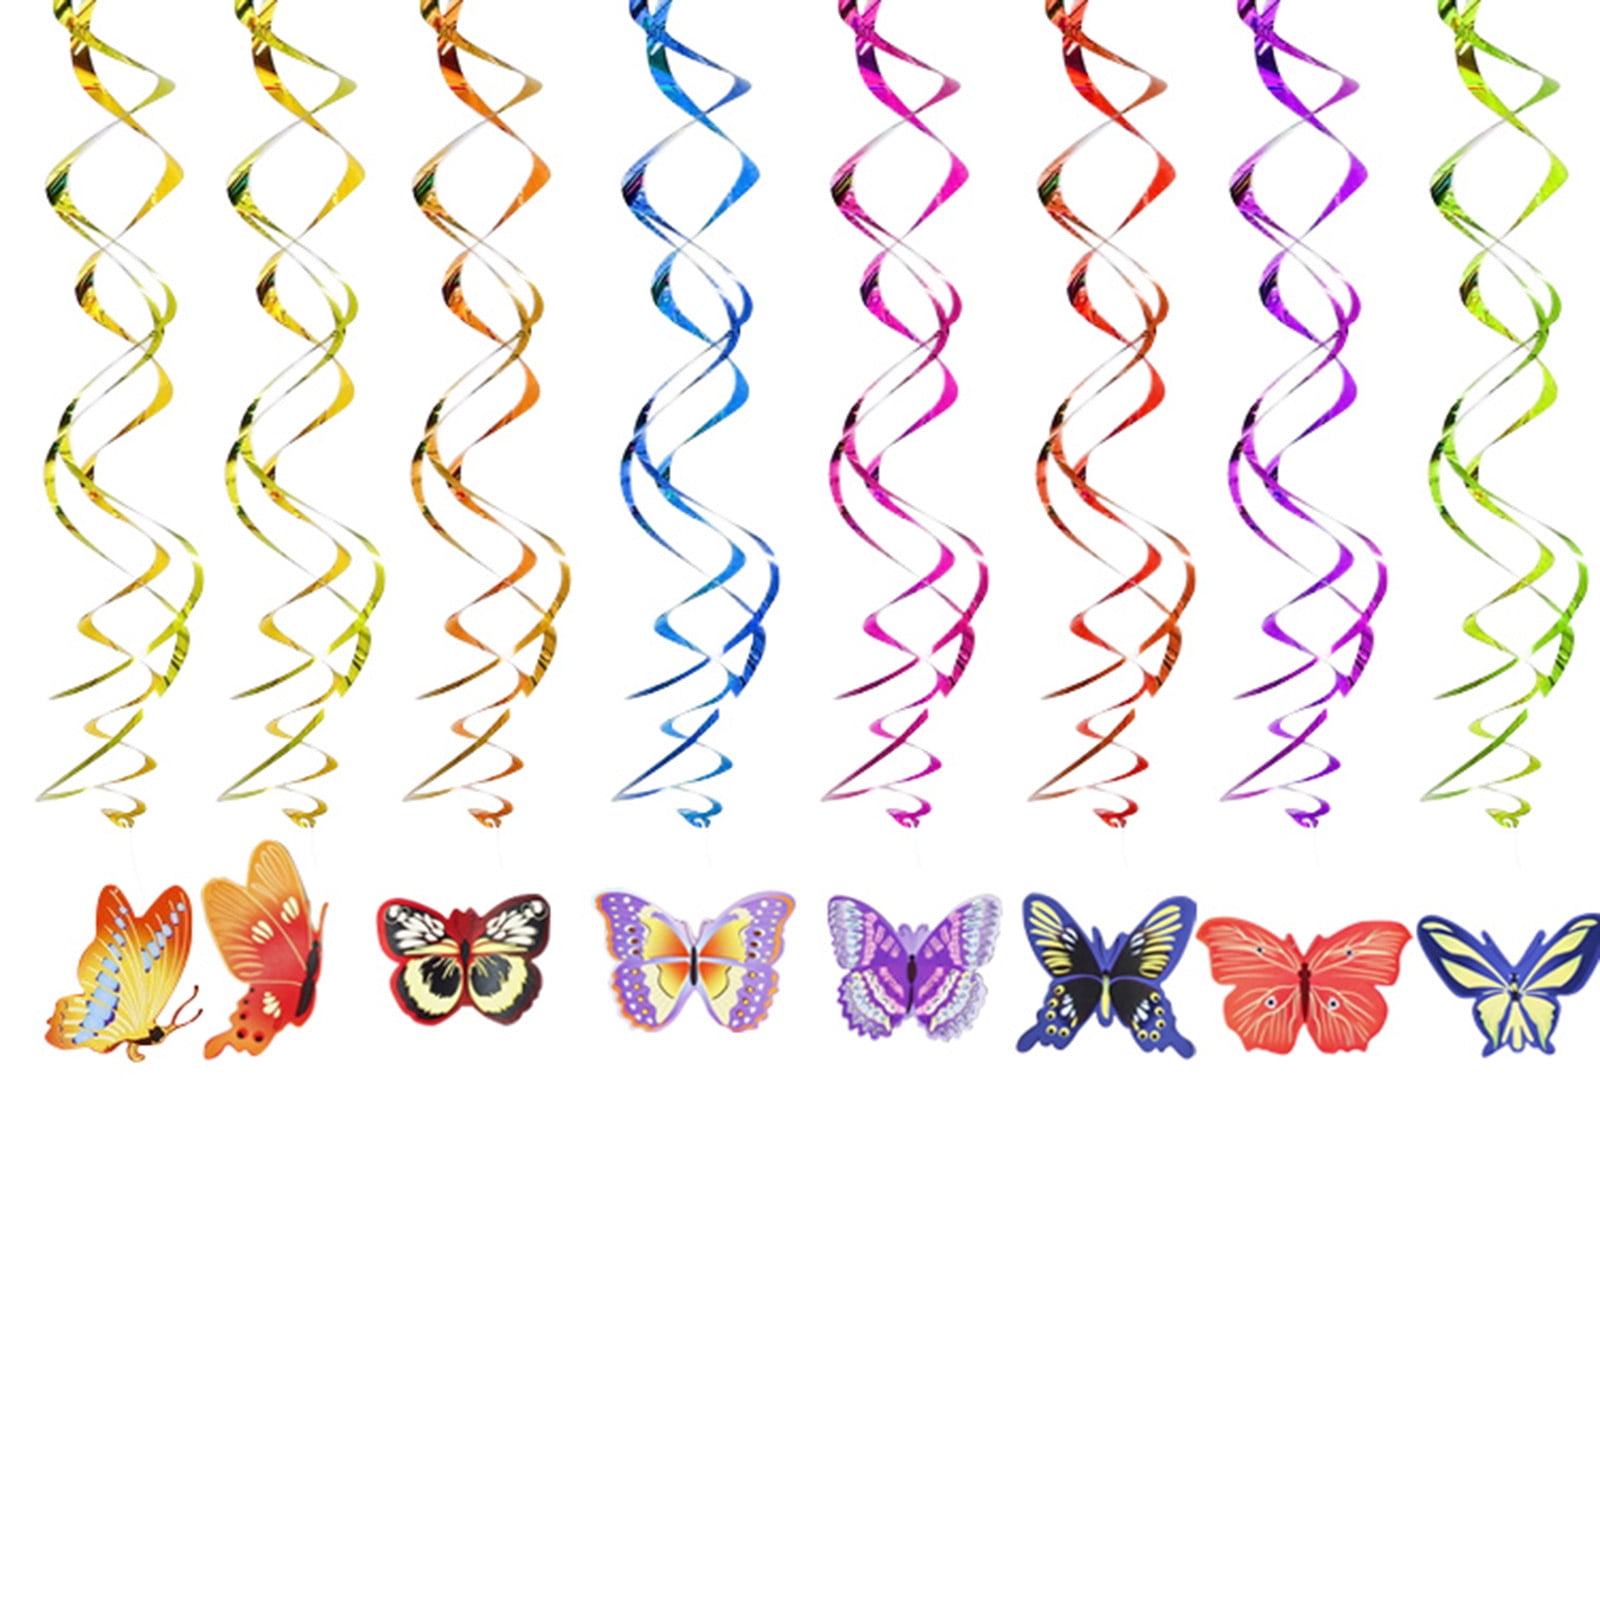  Mardi Gras Feather Monarch Butterfly Decoration 3 Size Fake  Butterfly Realistic Butterfly Crafts Artificial Butterfly Wall Decor for  Carnival Mardi Gras Party Home Bedroom Wedding (Purple, 36 Pcs) : Arts,  Crafts